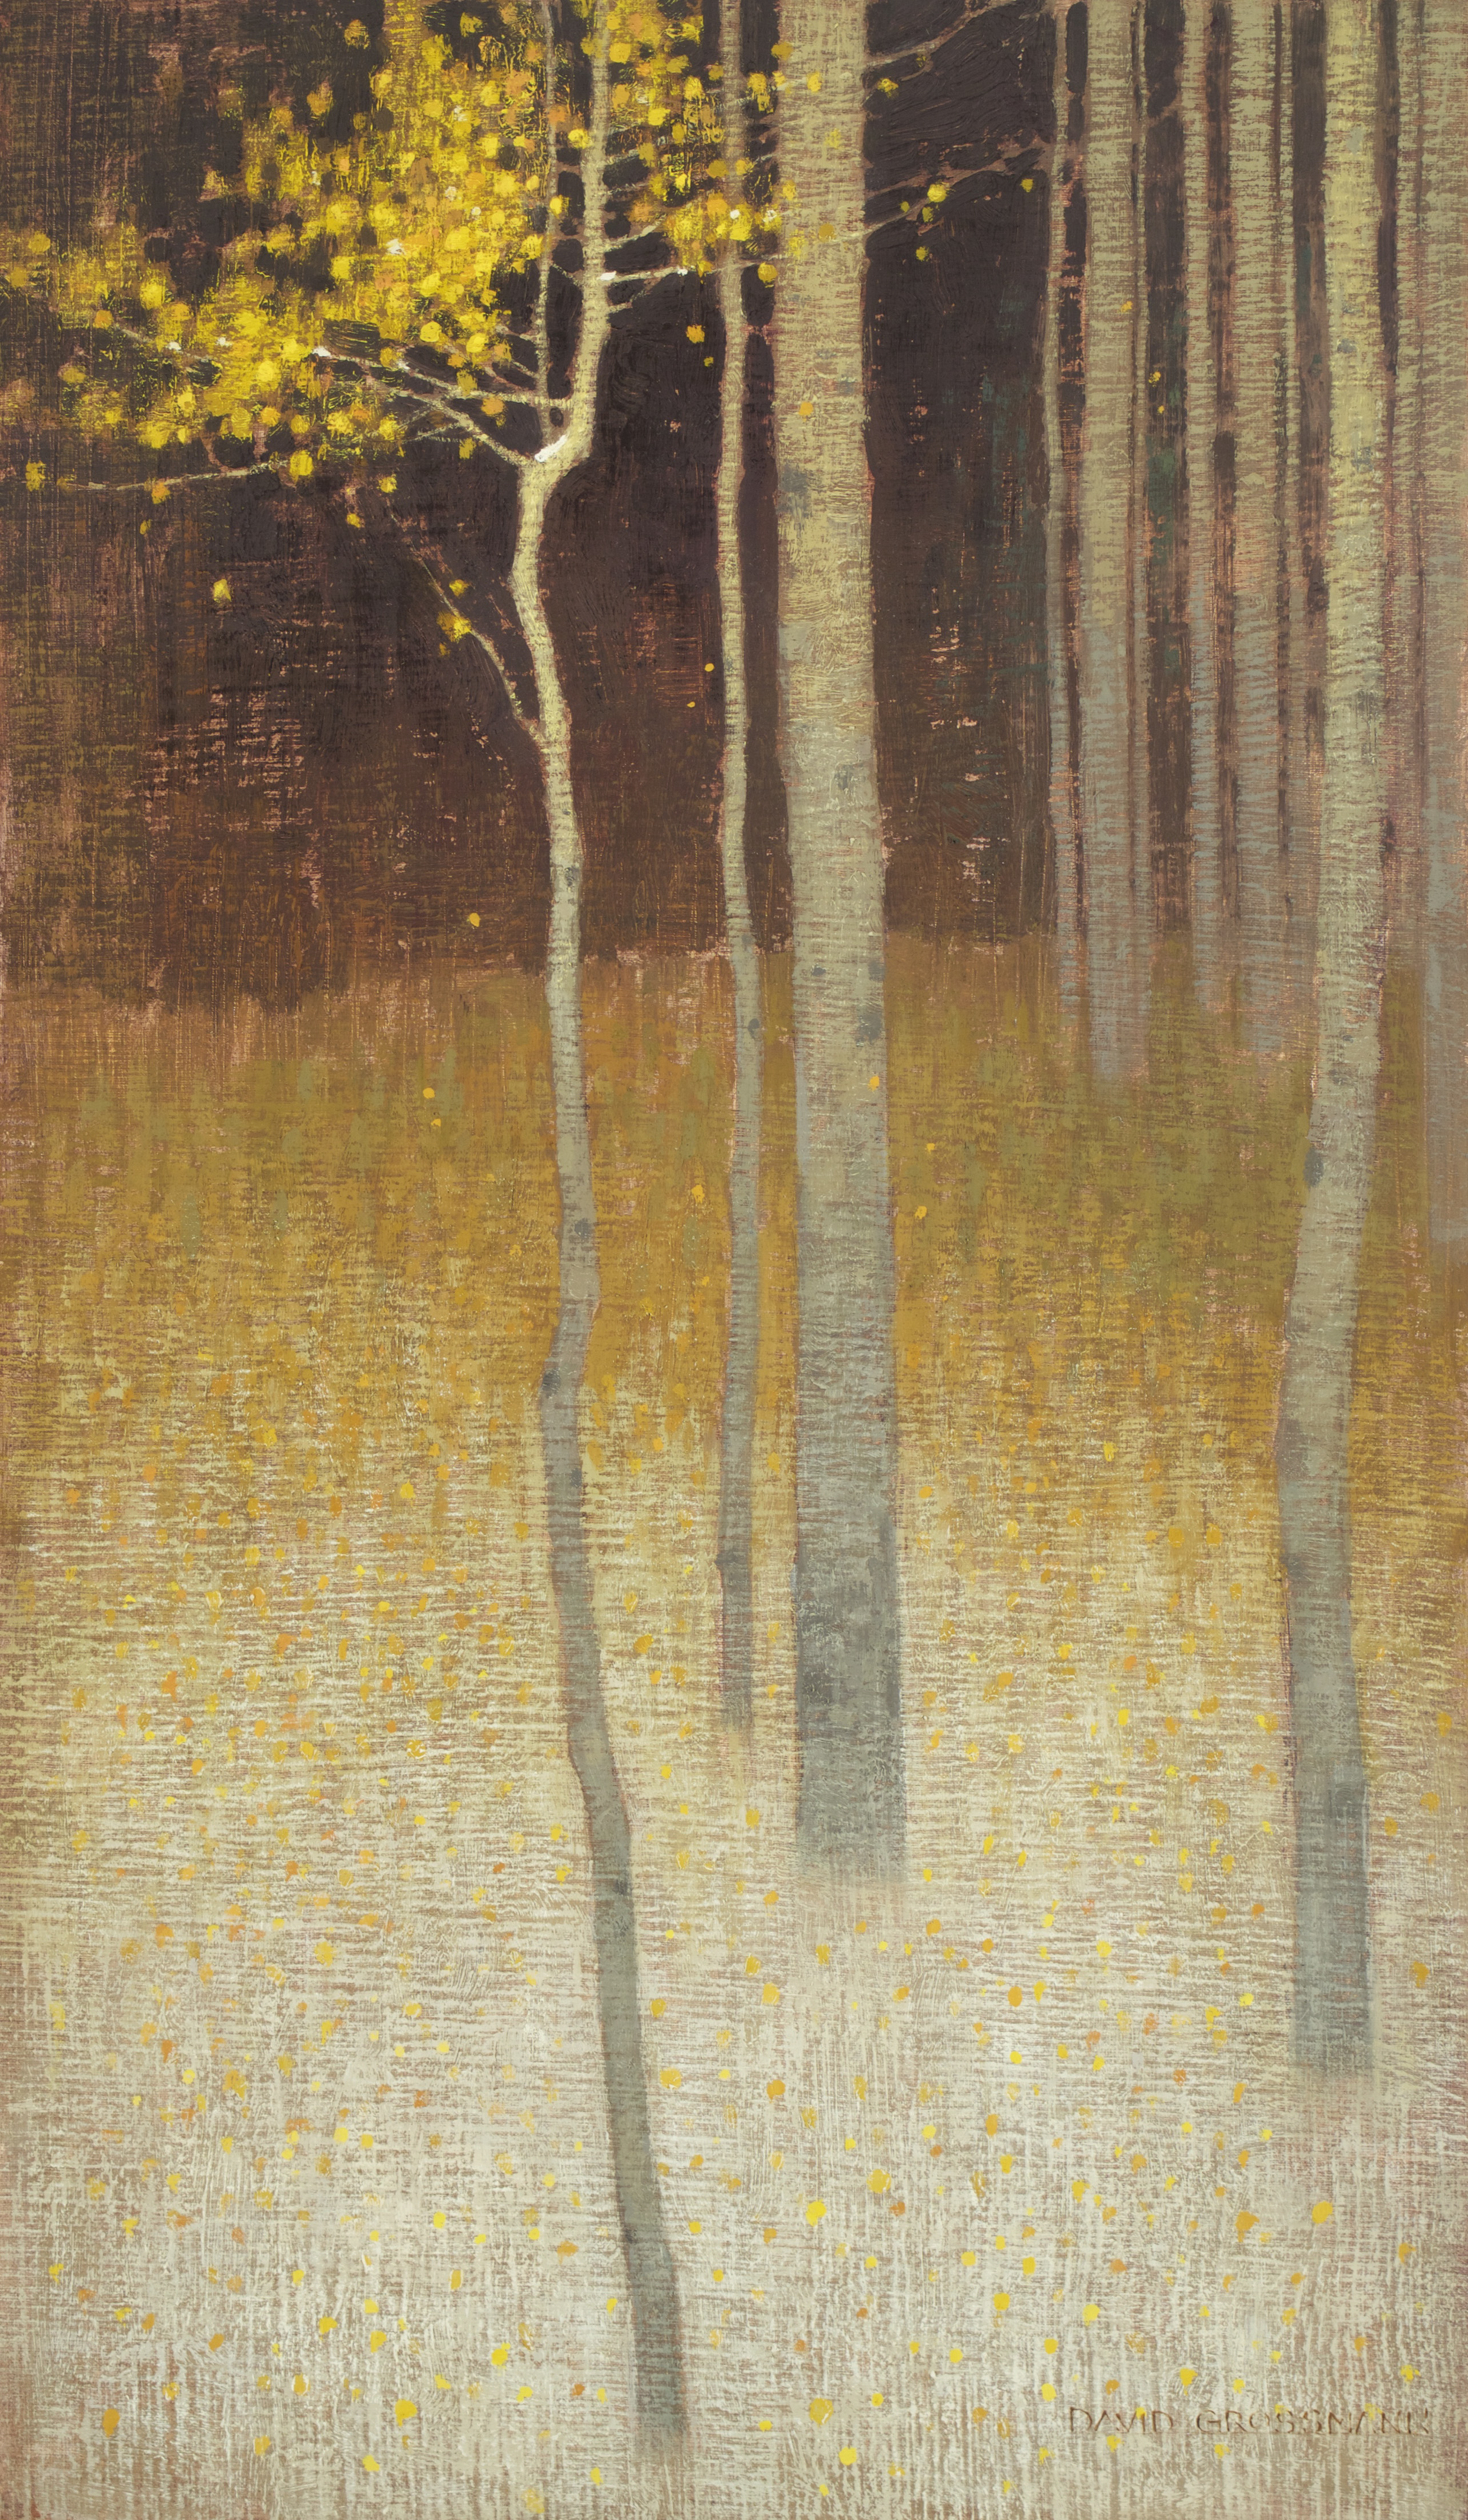 Last Leaves and First Snow by David Grossmann